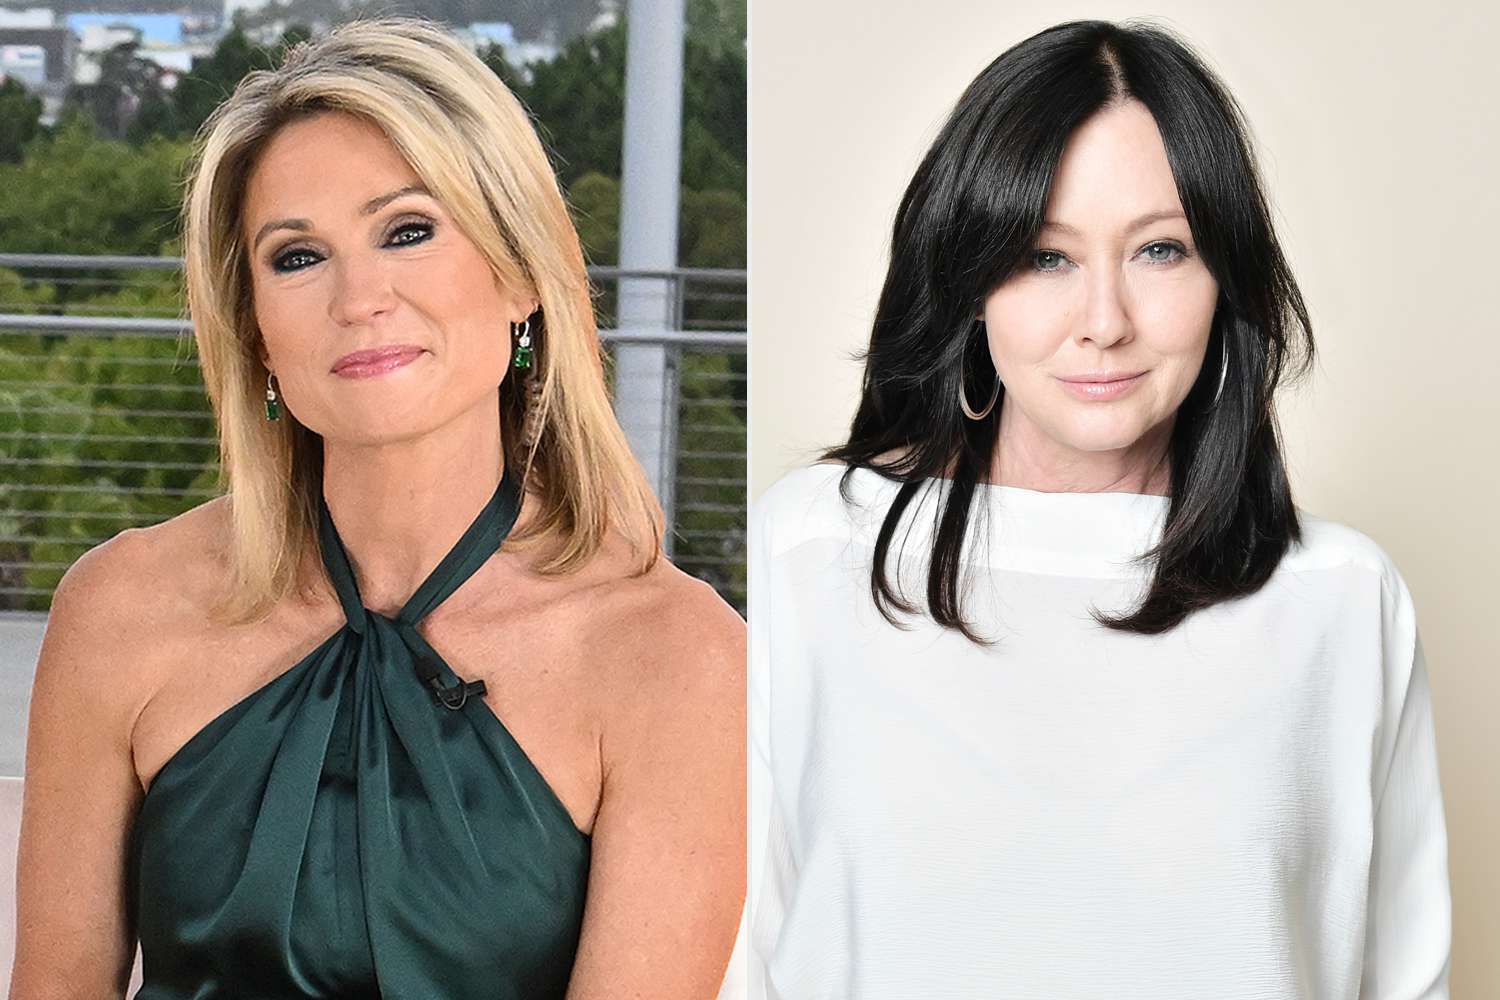 Amy Robach says Shannen Doherty had 'such an impact' on her: 'I just always marveled at her bravery'